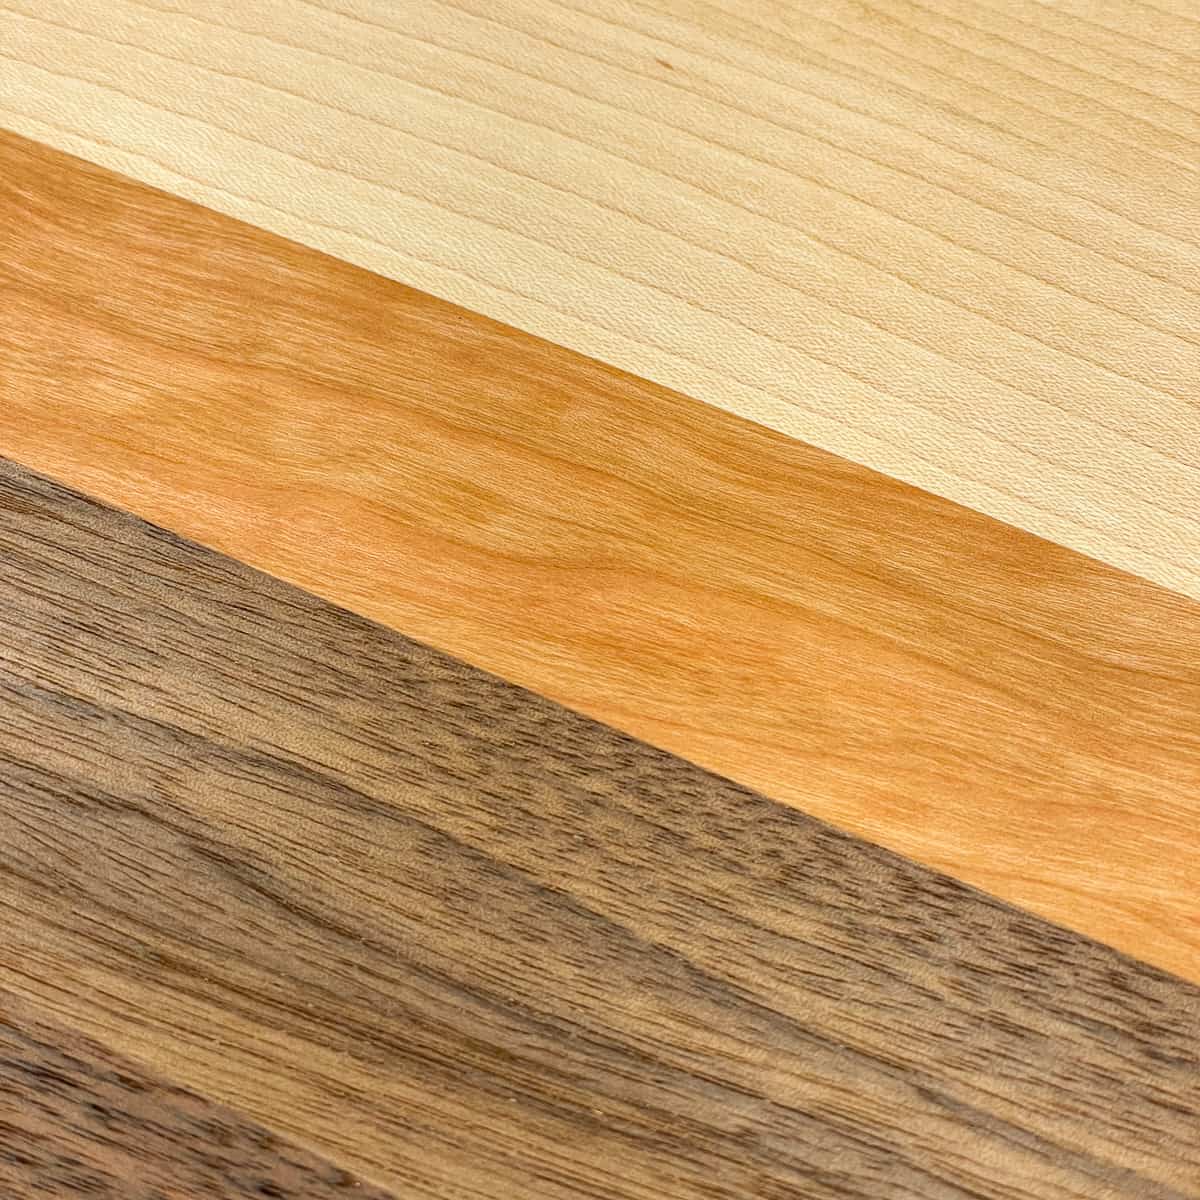 tight joints between maple, cherry and walnut wood strips in cutting board